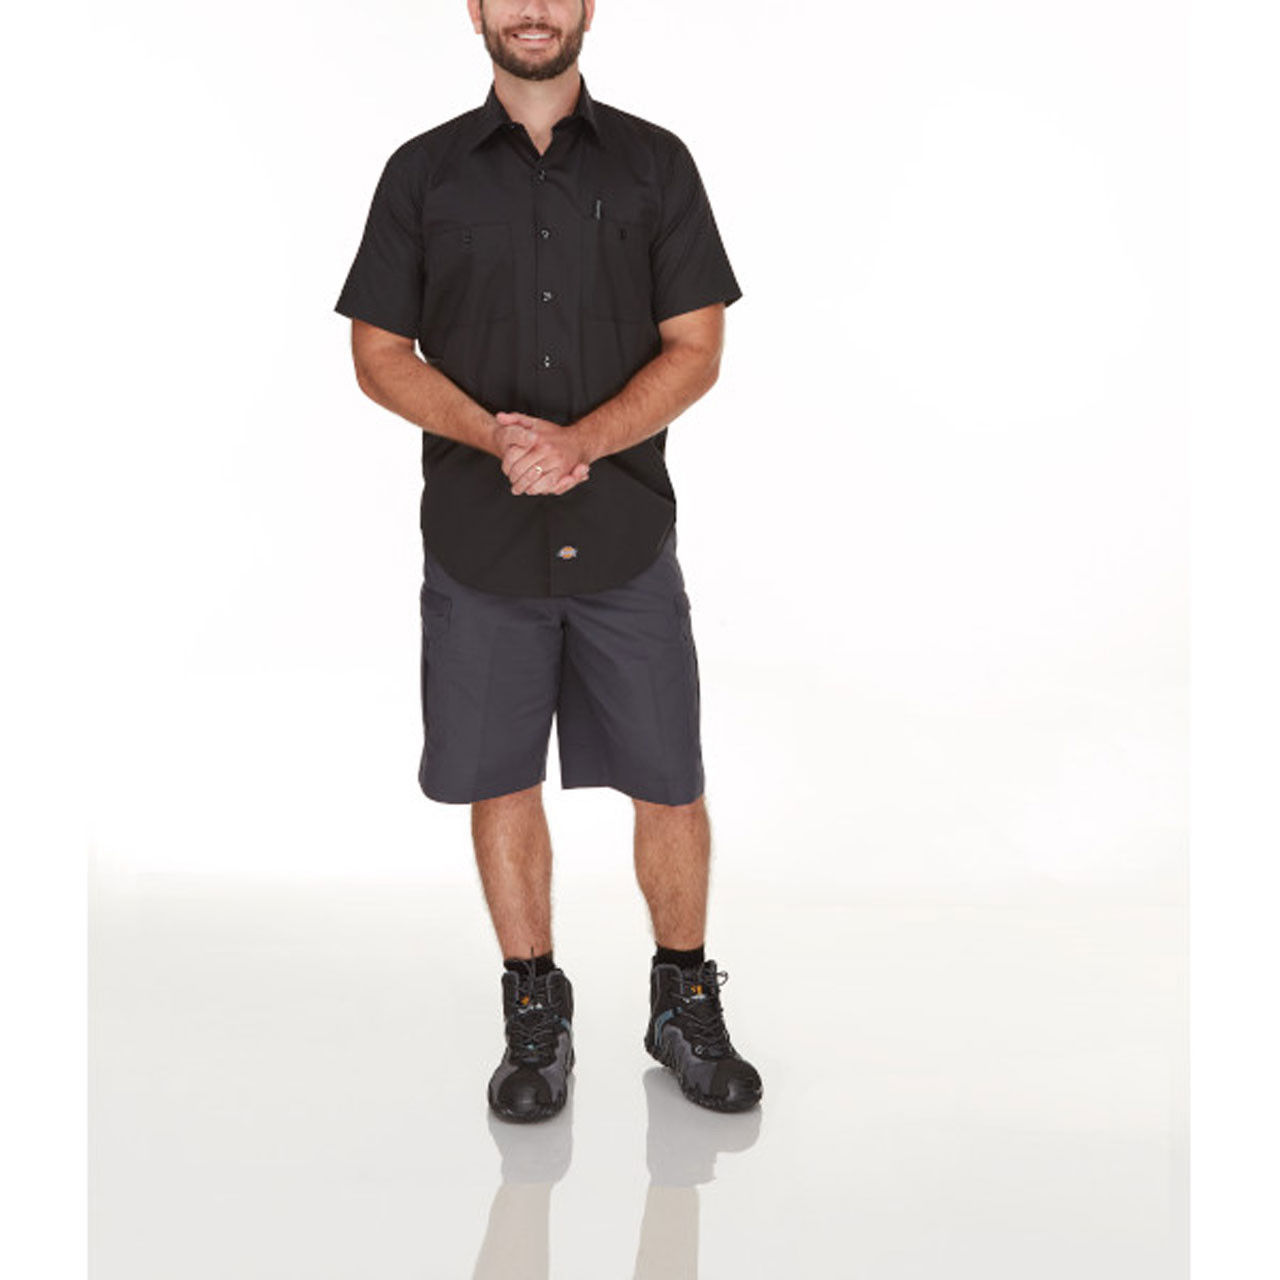 What is the collar style of Dickies LS51 cooling work shirts?